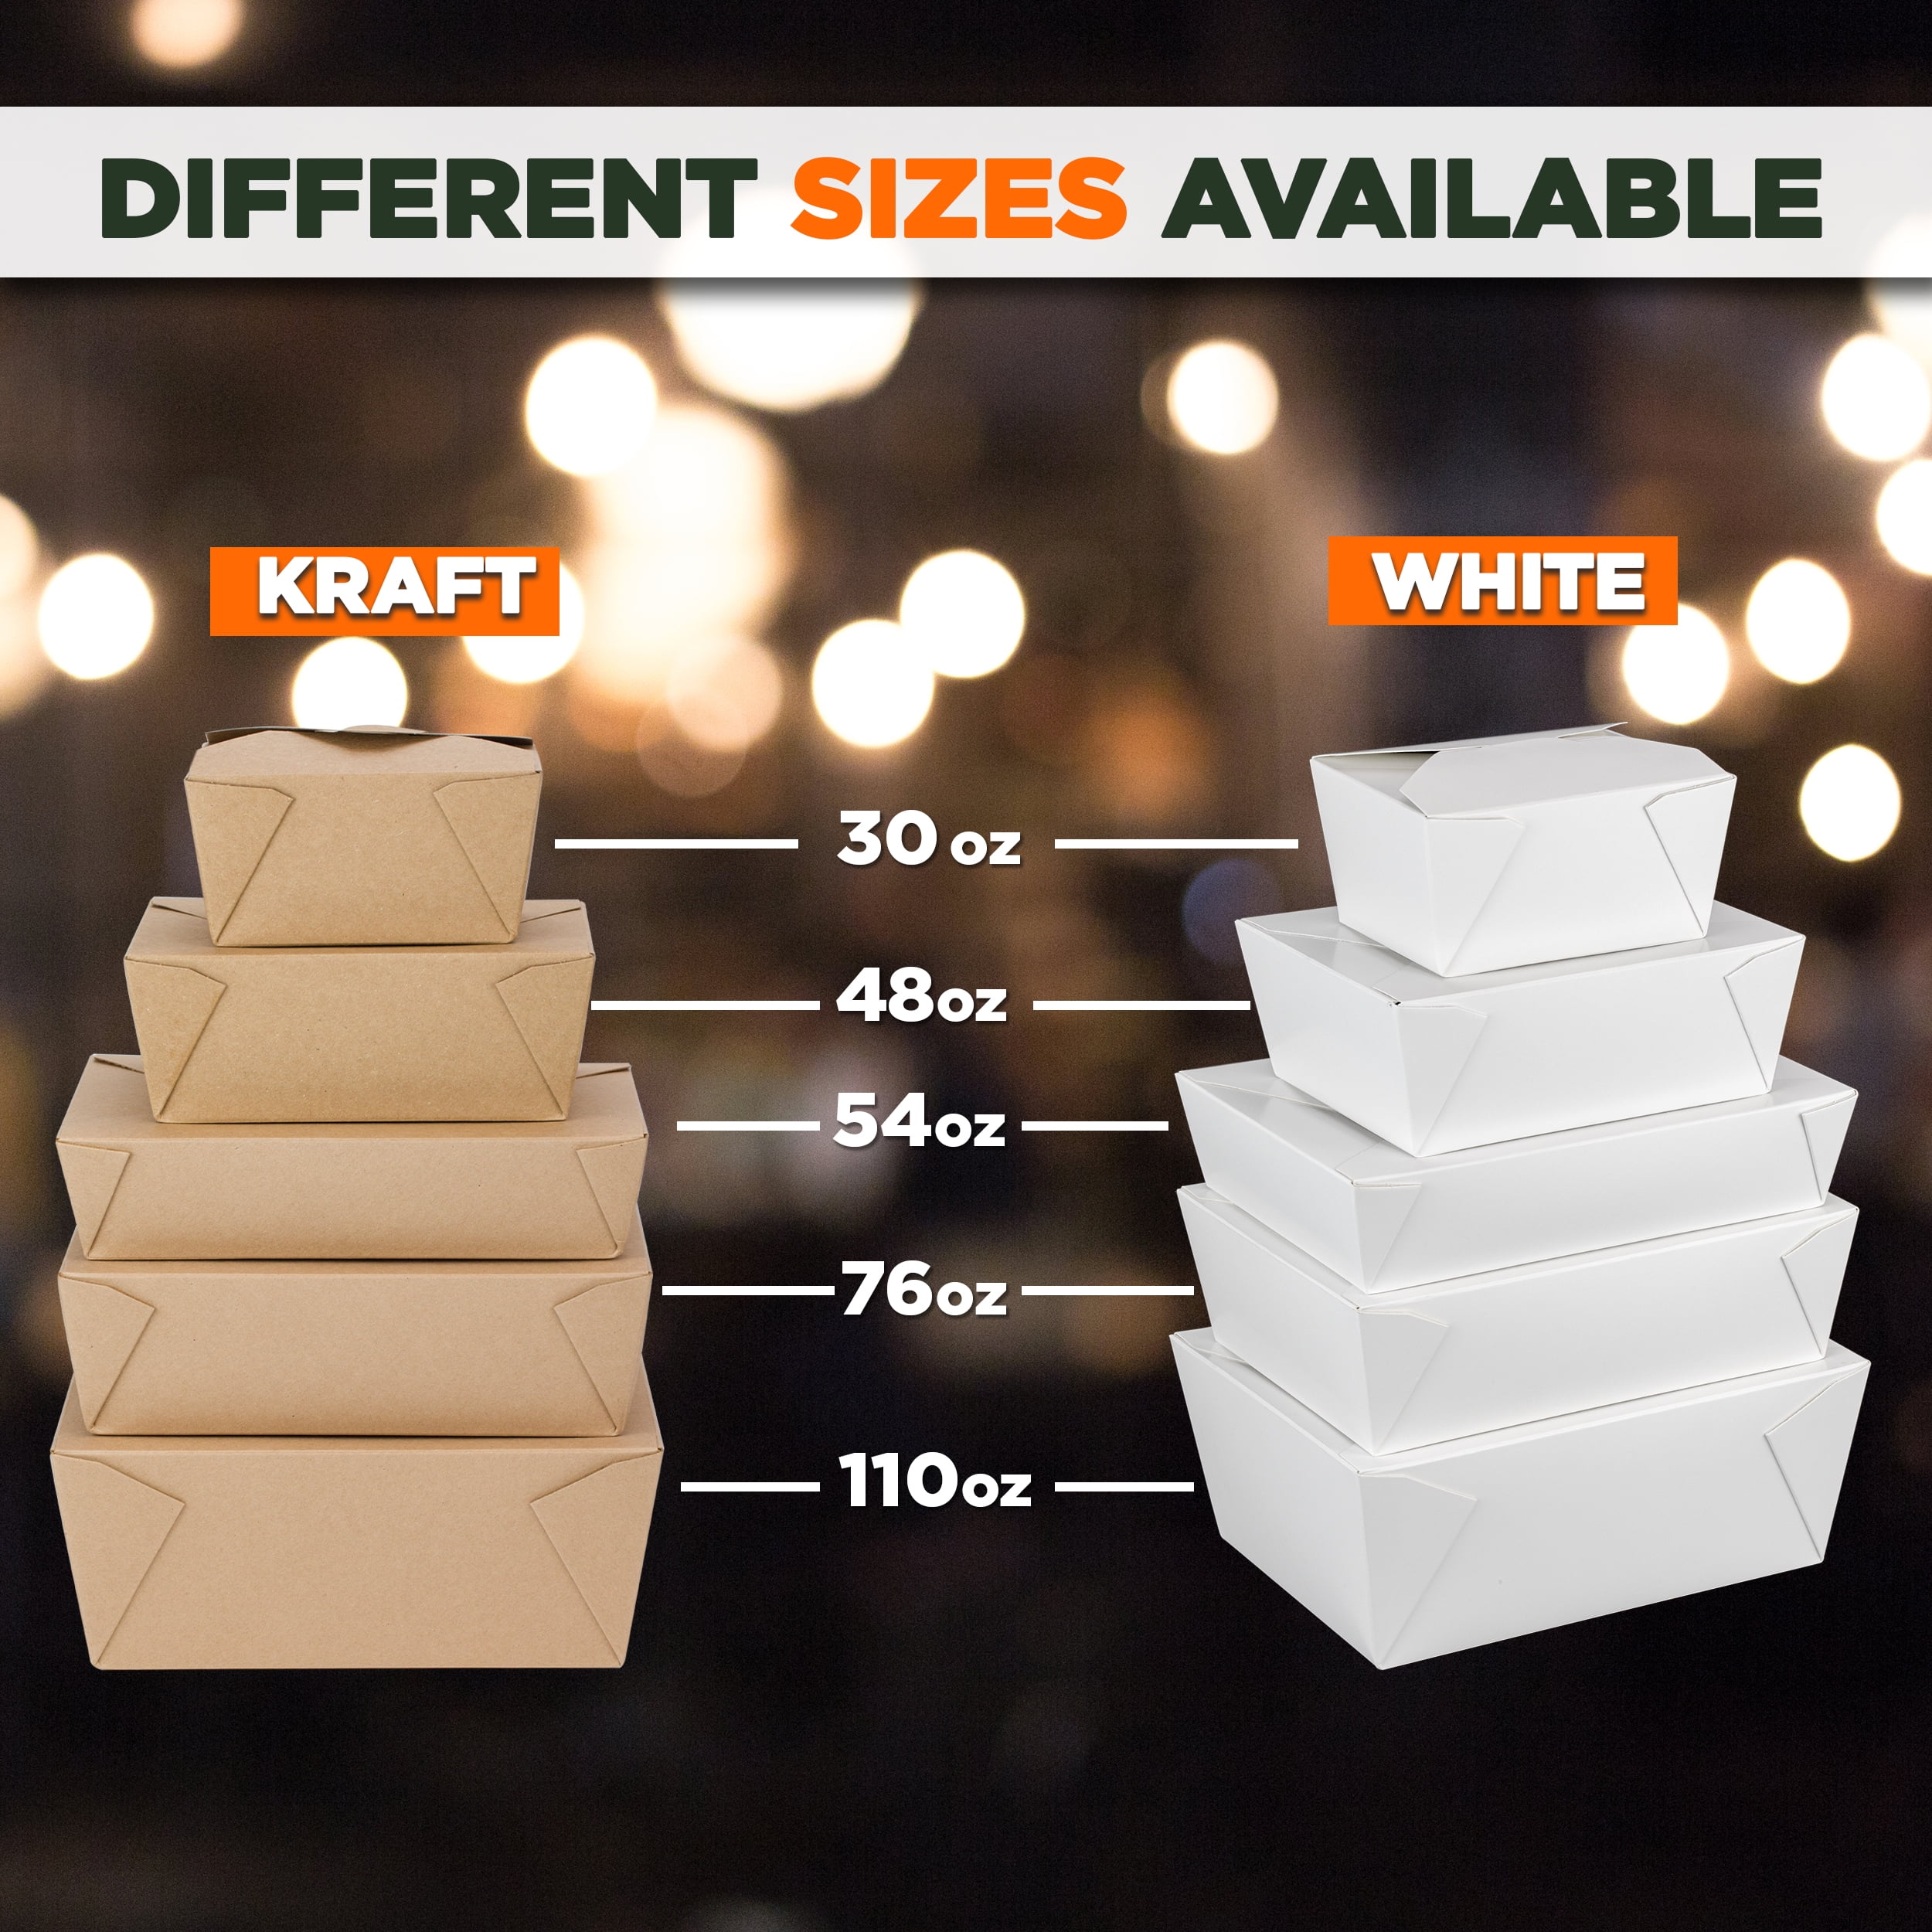 Buy [40 Pack] 110 oz Paper Take Out Containers 8.8 x 6.5 x 3.5 - Kraft  Lunch Meal Food Boxes, Disposable Storage to Go Packaging, Microwave Safe,  Leak Grease Resistant for Restaurant